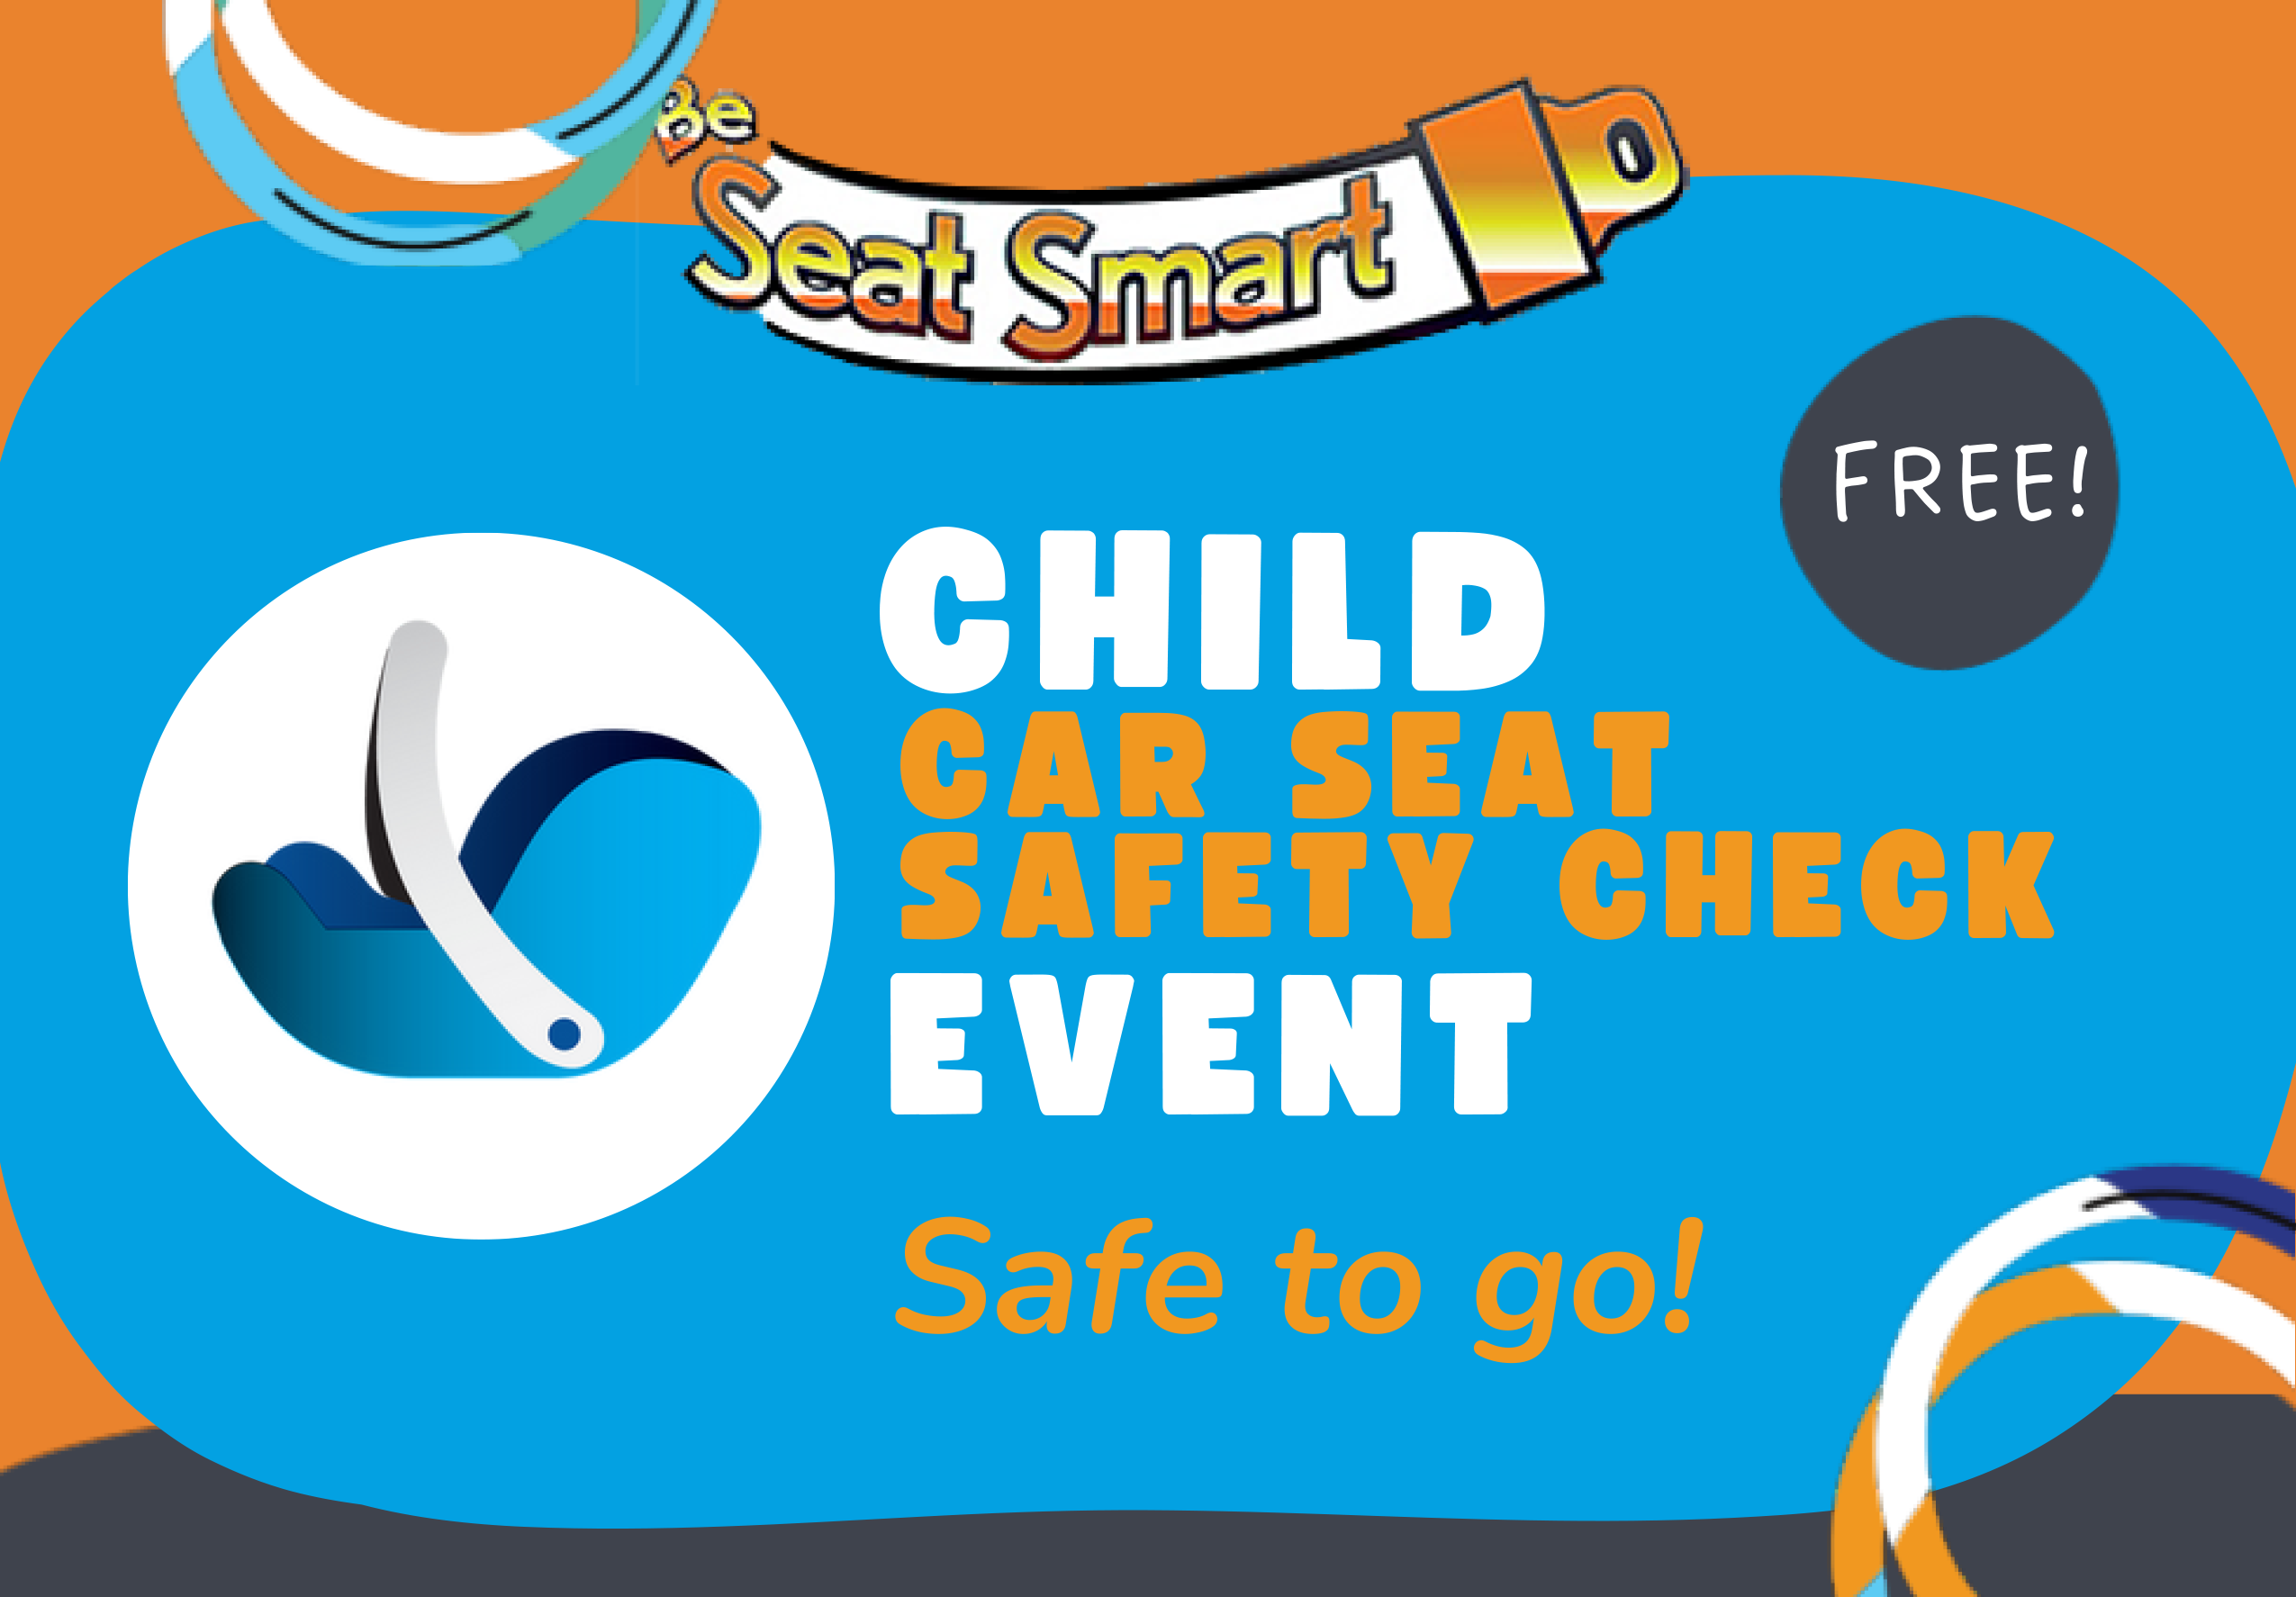 Orange and blue graphic with text stating, "child car seat safety check event, Safe to go!" with an image of a blue carseat